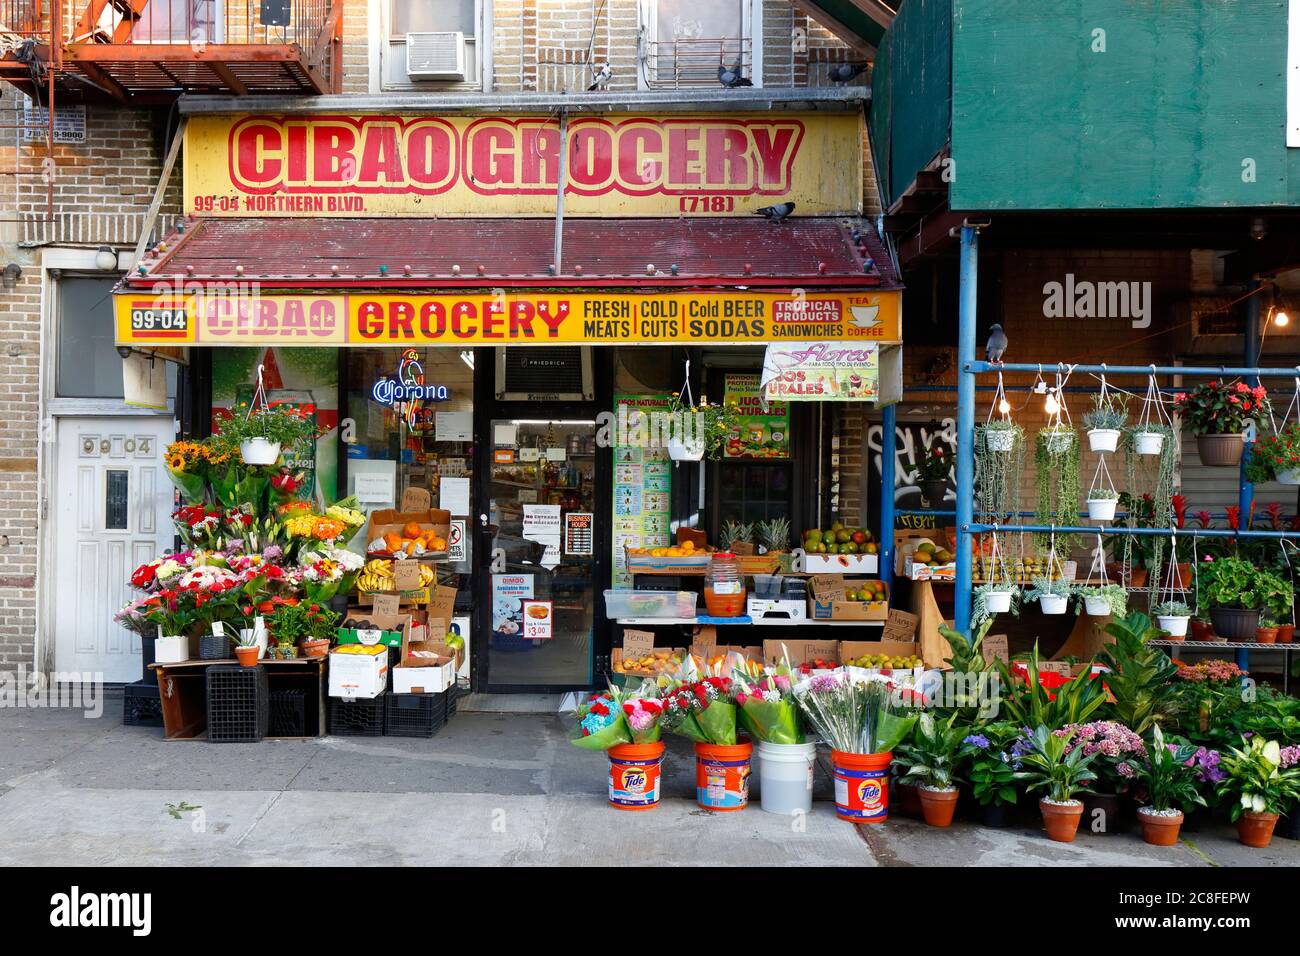 Cibao Grocery, 99-01 Northern Boulevard, Queens, NY. exterior storefront of a bodega, grocery store in Corona neighborhood. Stock Photo